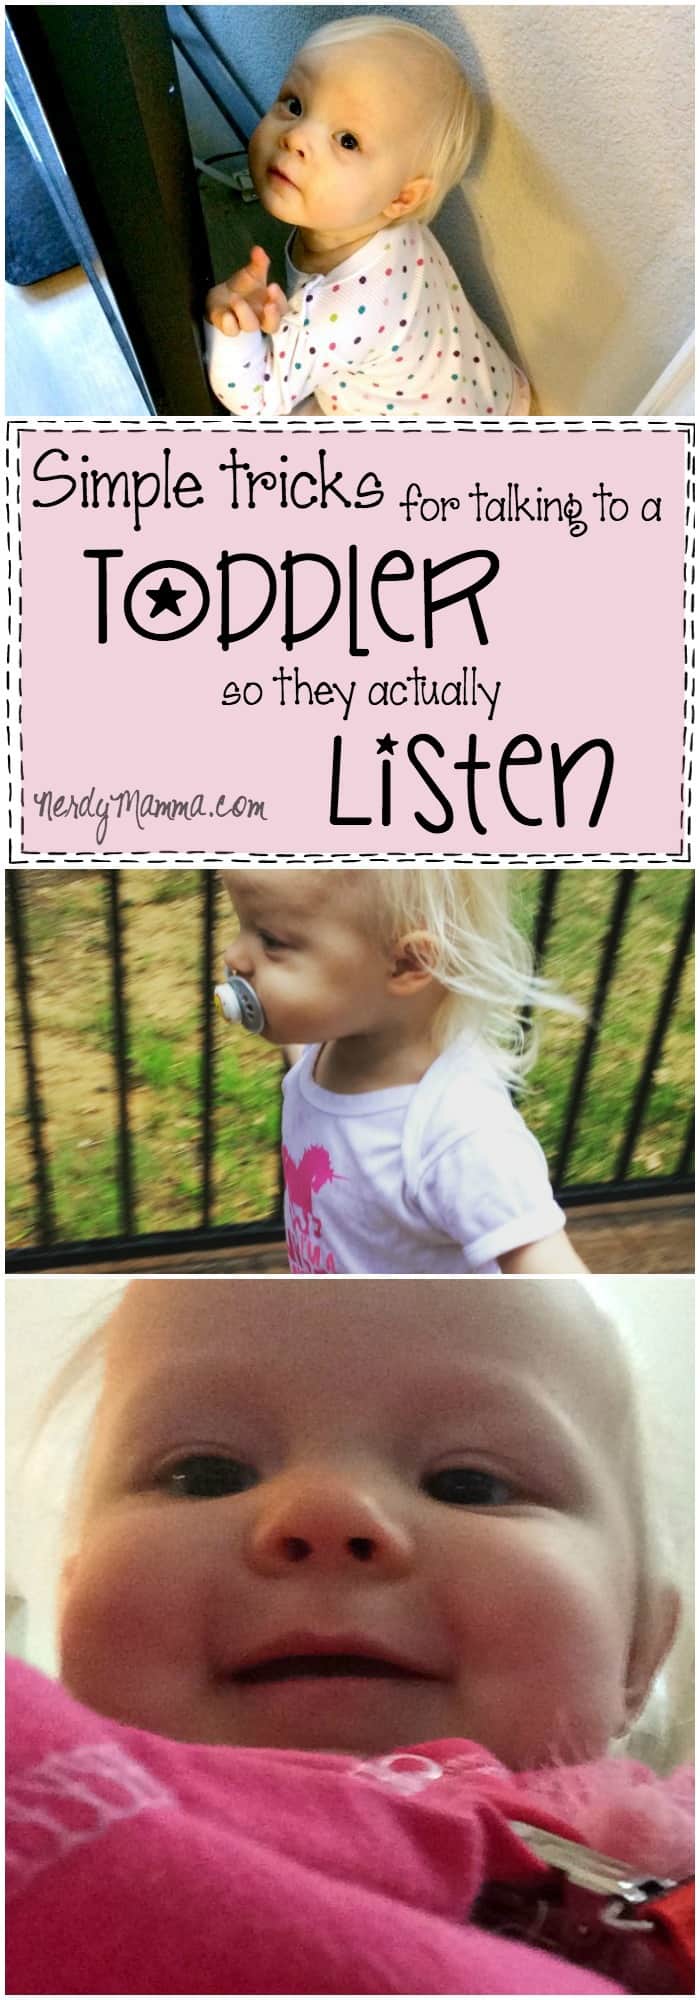 I ABSOLUTELY love these simple tricks for talking to a toddler so they actually listen...I mean, so easy, but GENIUS!